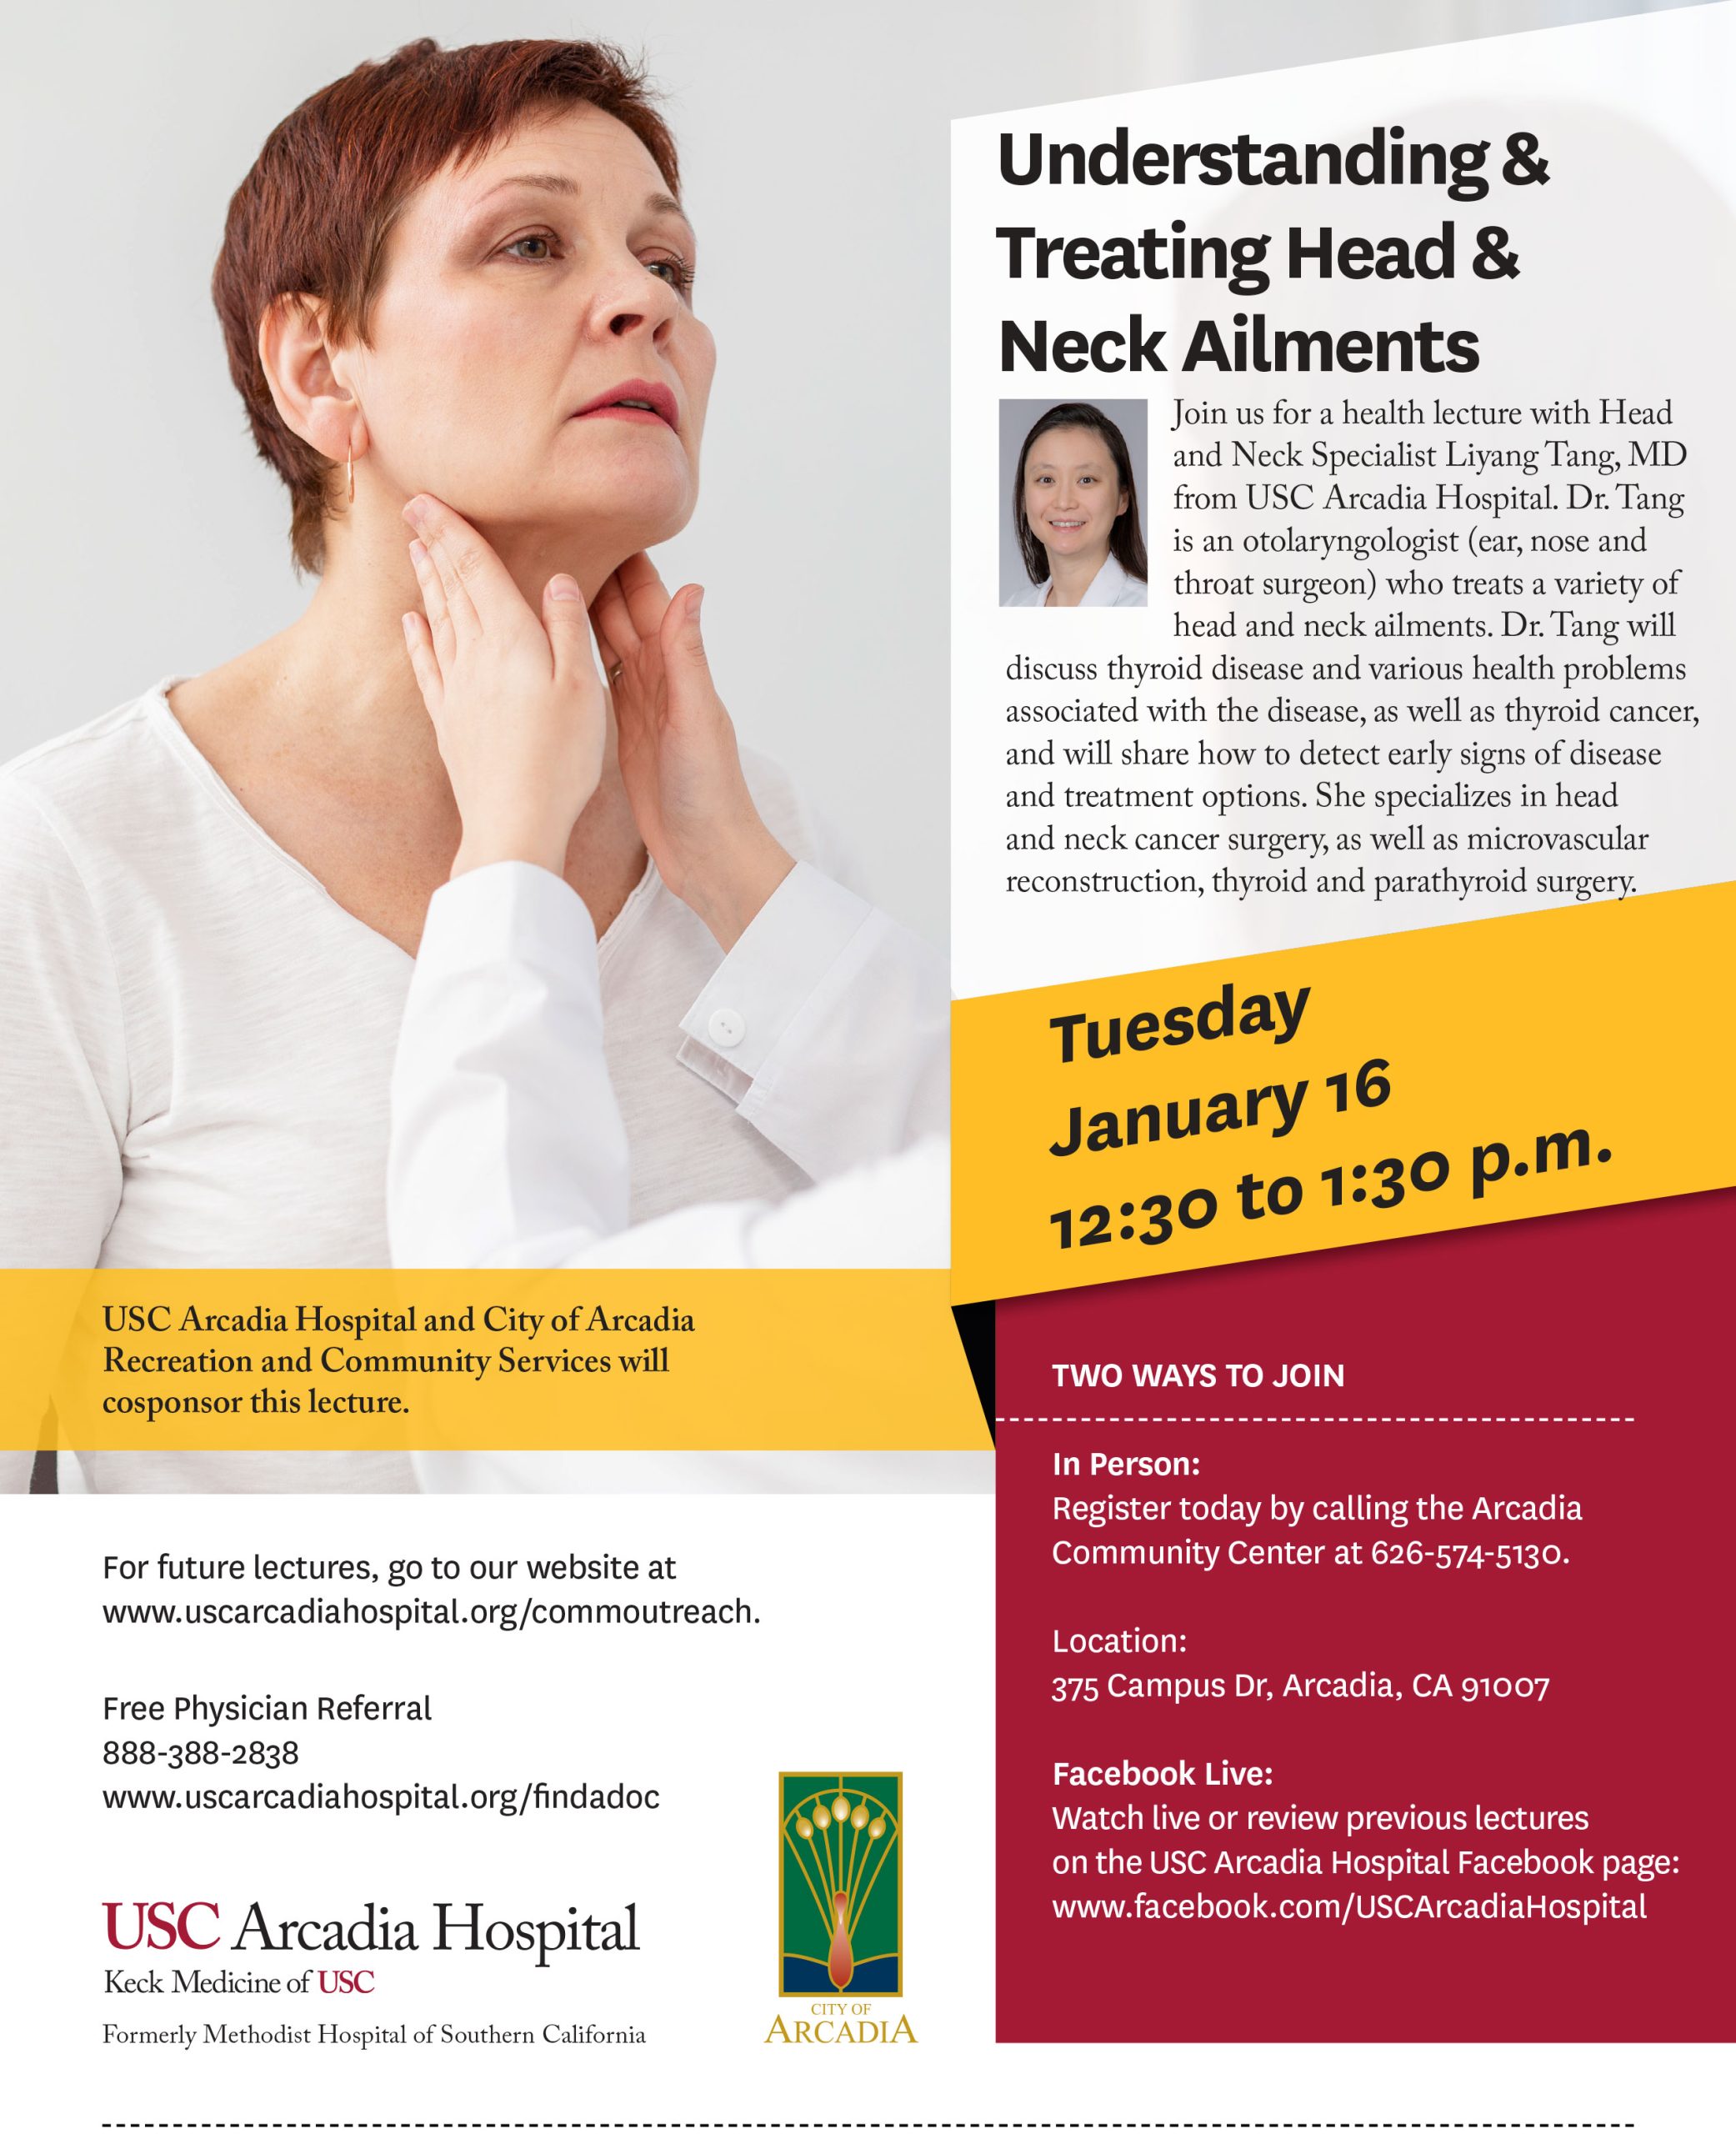 Understanding and Treating Neck and Head Ailments lecture flyer with USC Arcadia Hospital 